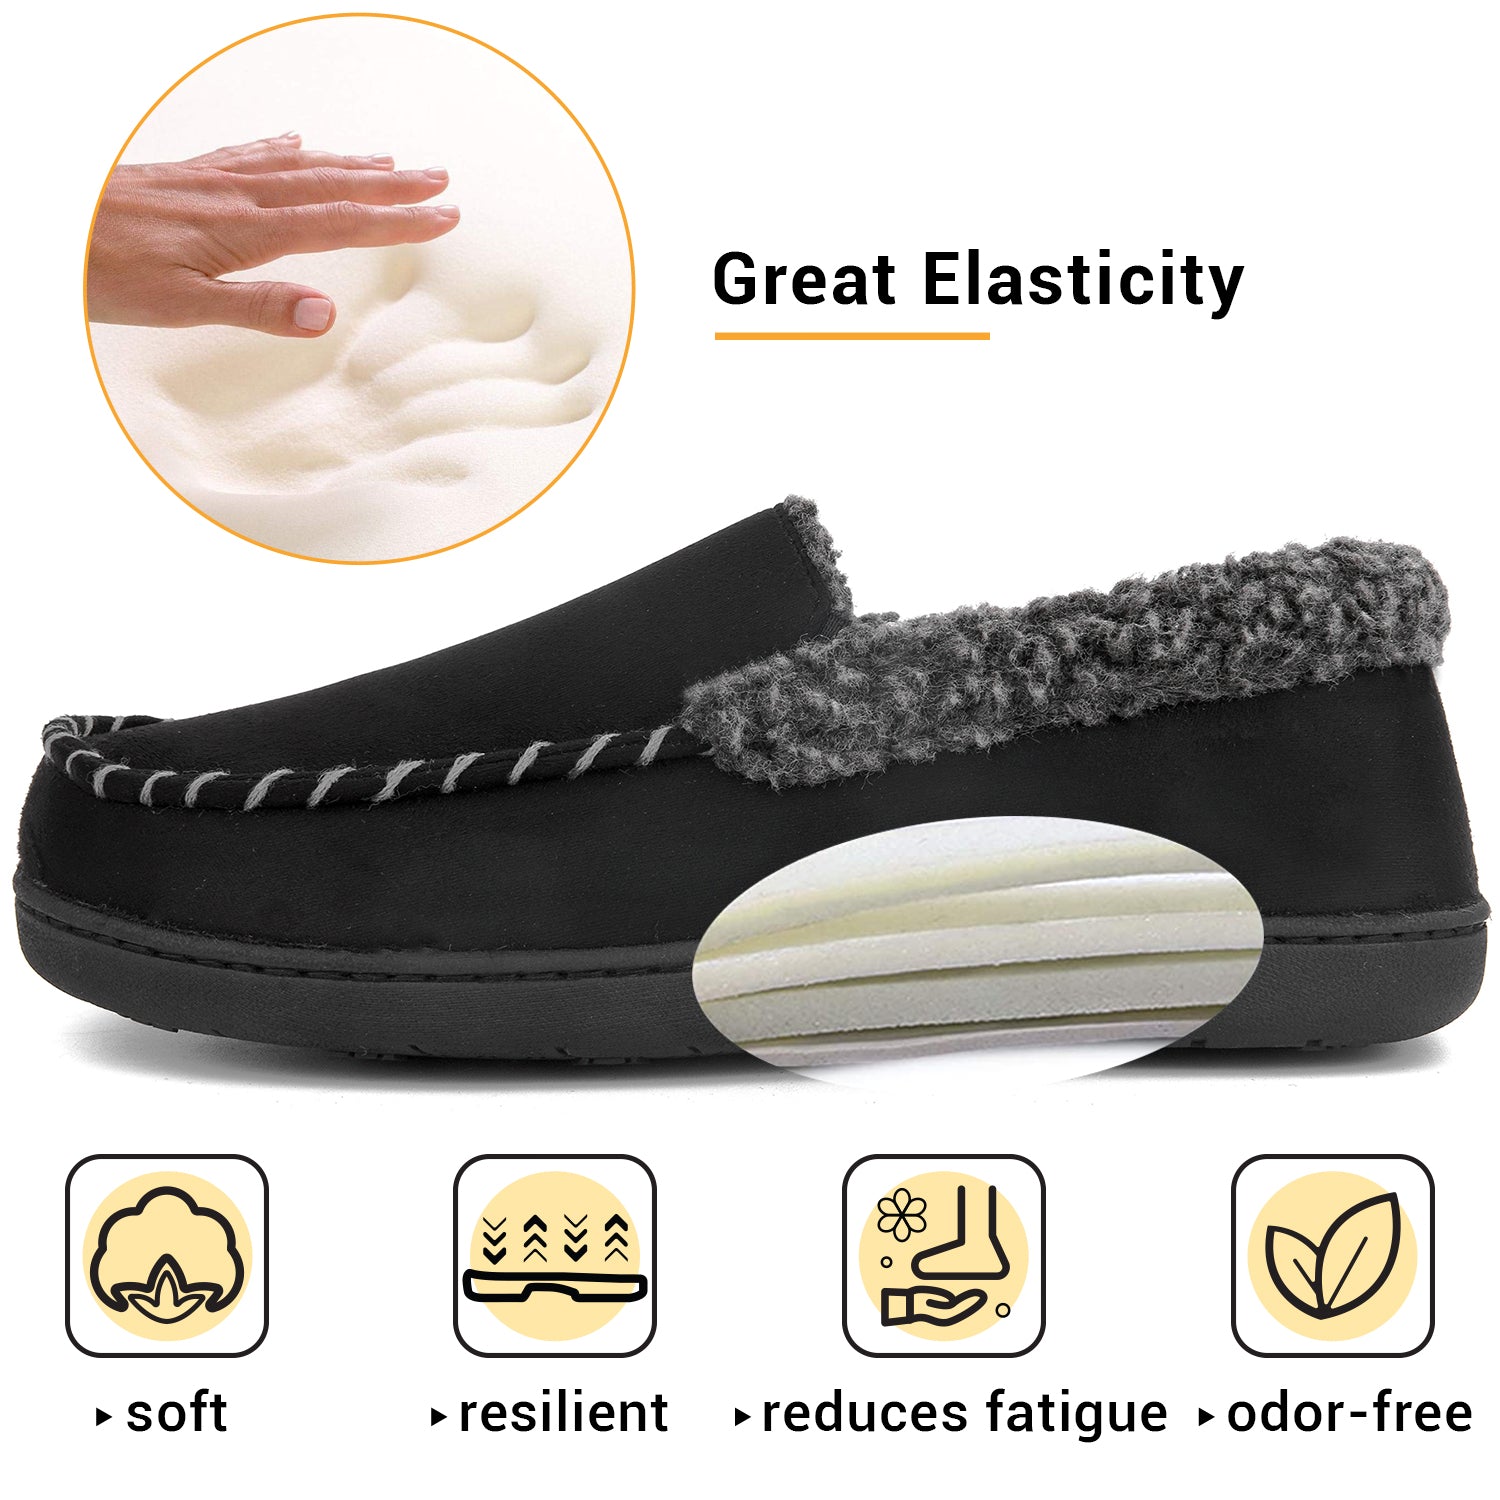 outdoor moccasin slippers